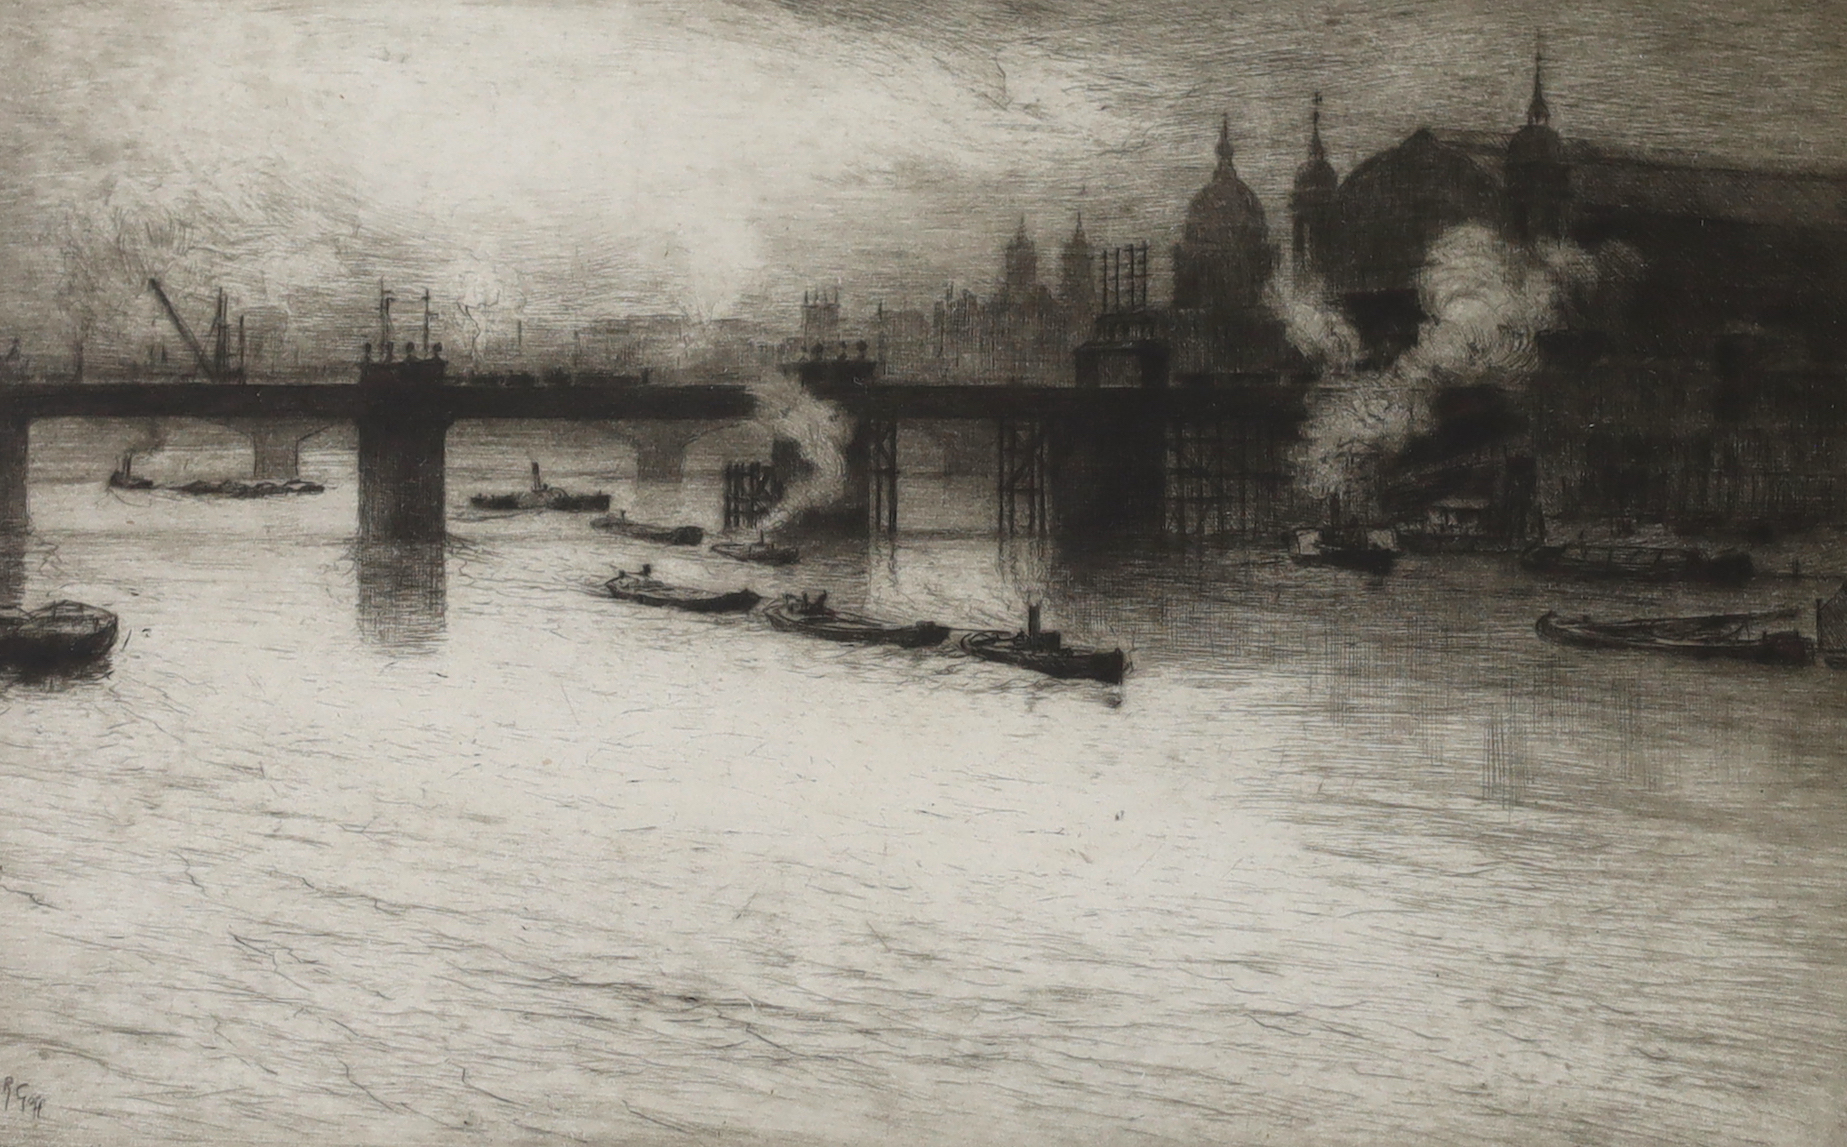 Robert Charles Goff (1837-1922), etching, 'Boats on the river Thames, Charing Cross', signed in pencil, label verso, 27 x 18cm